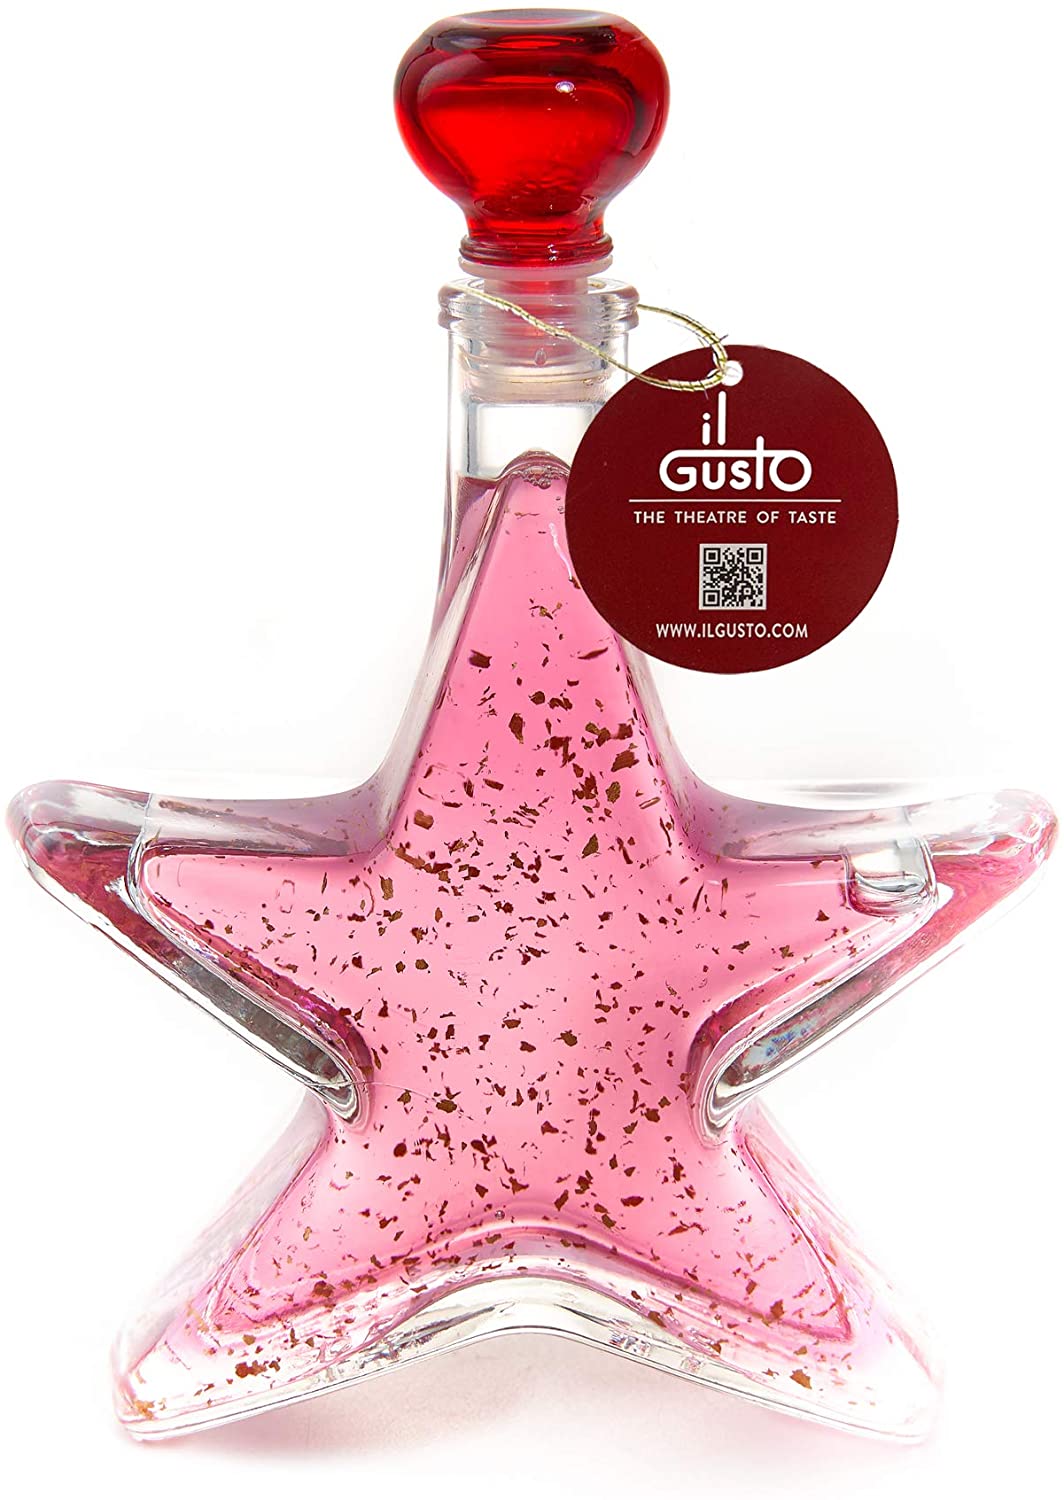 VODKA GIFT - PINK VODKA WITH 22 CARAT GOLD FLAKES IN STAR BOTTLE - 200ml - 18%